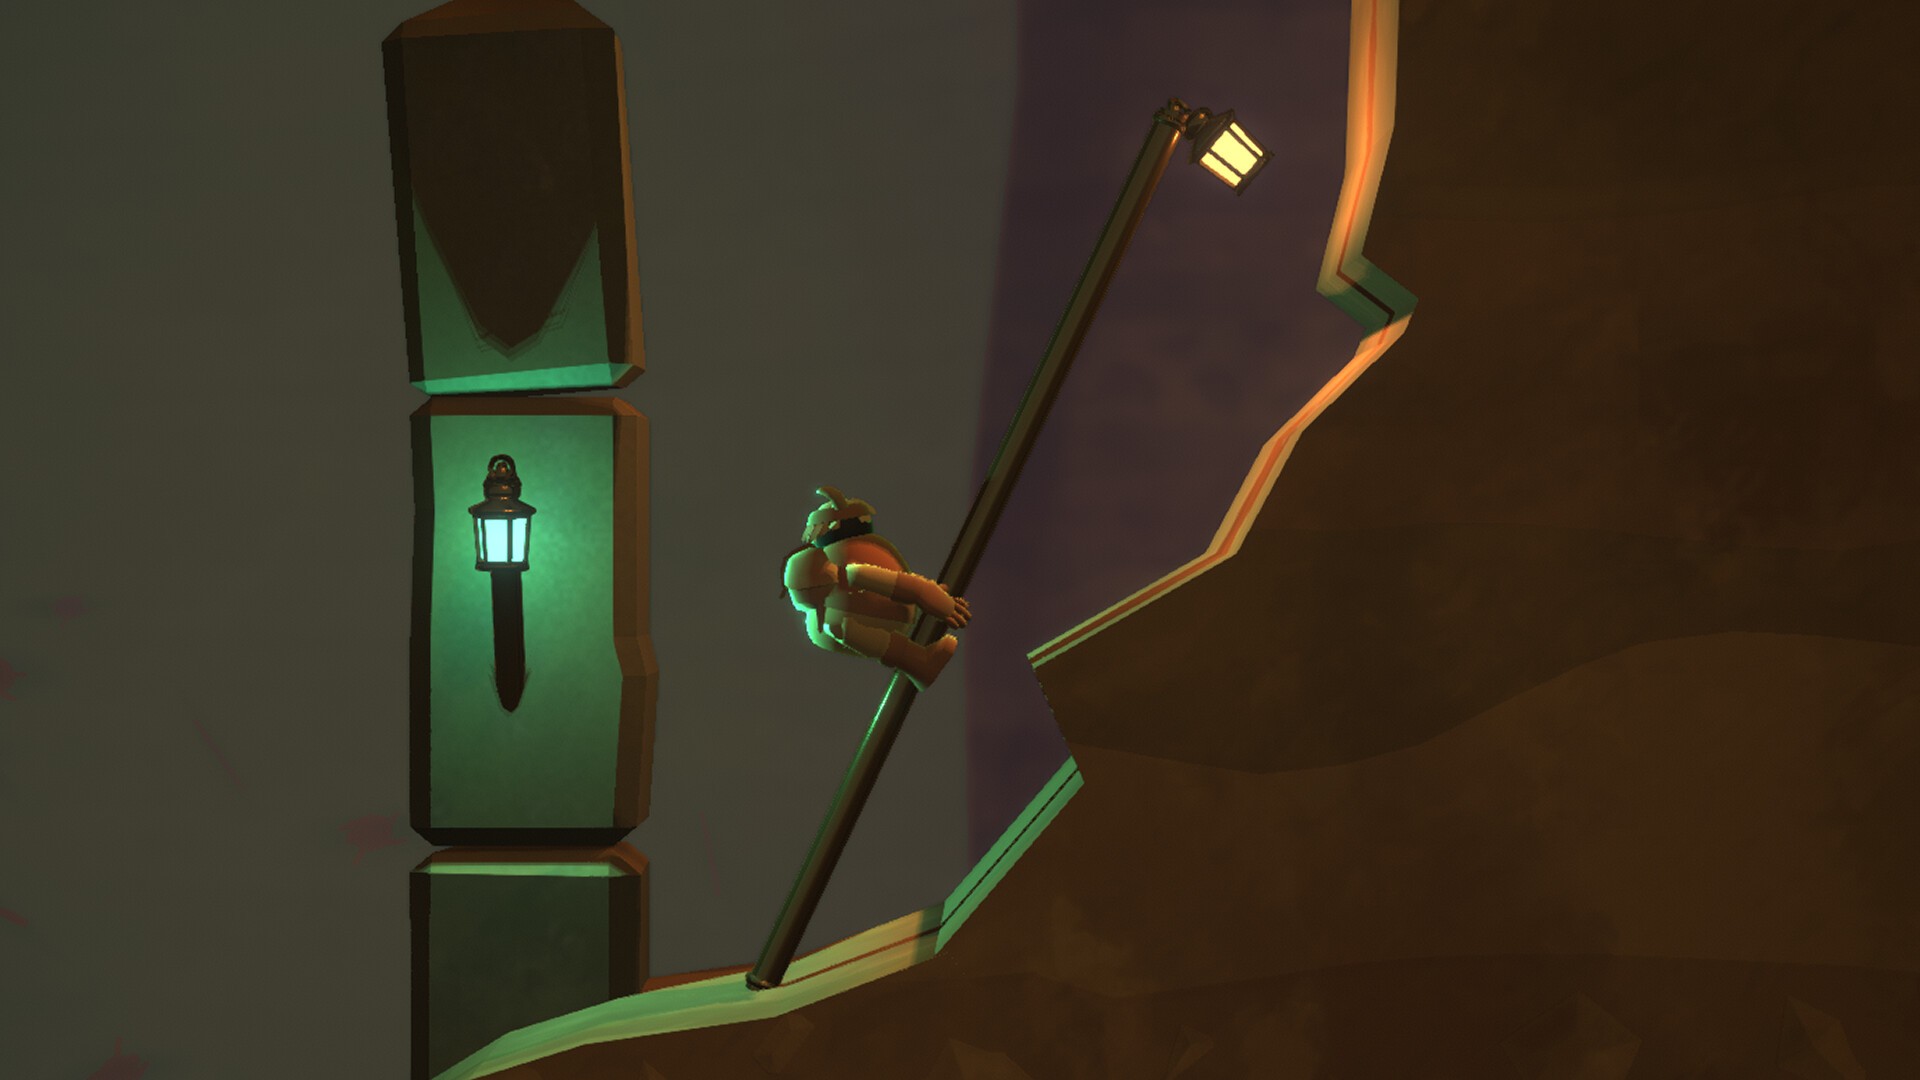 A difficult game about Climbing.